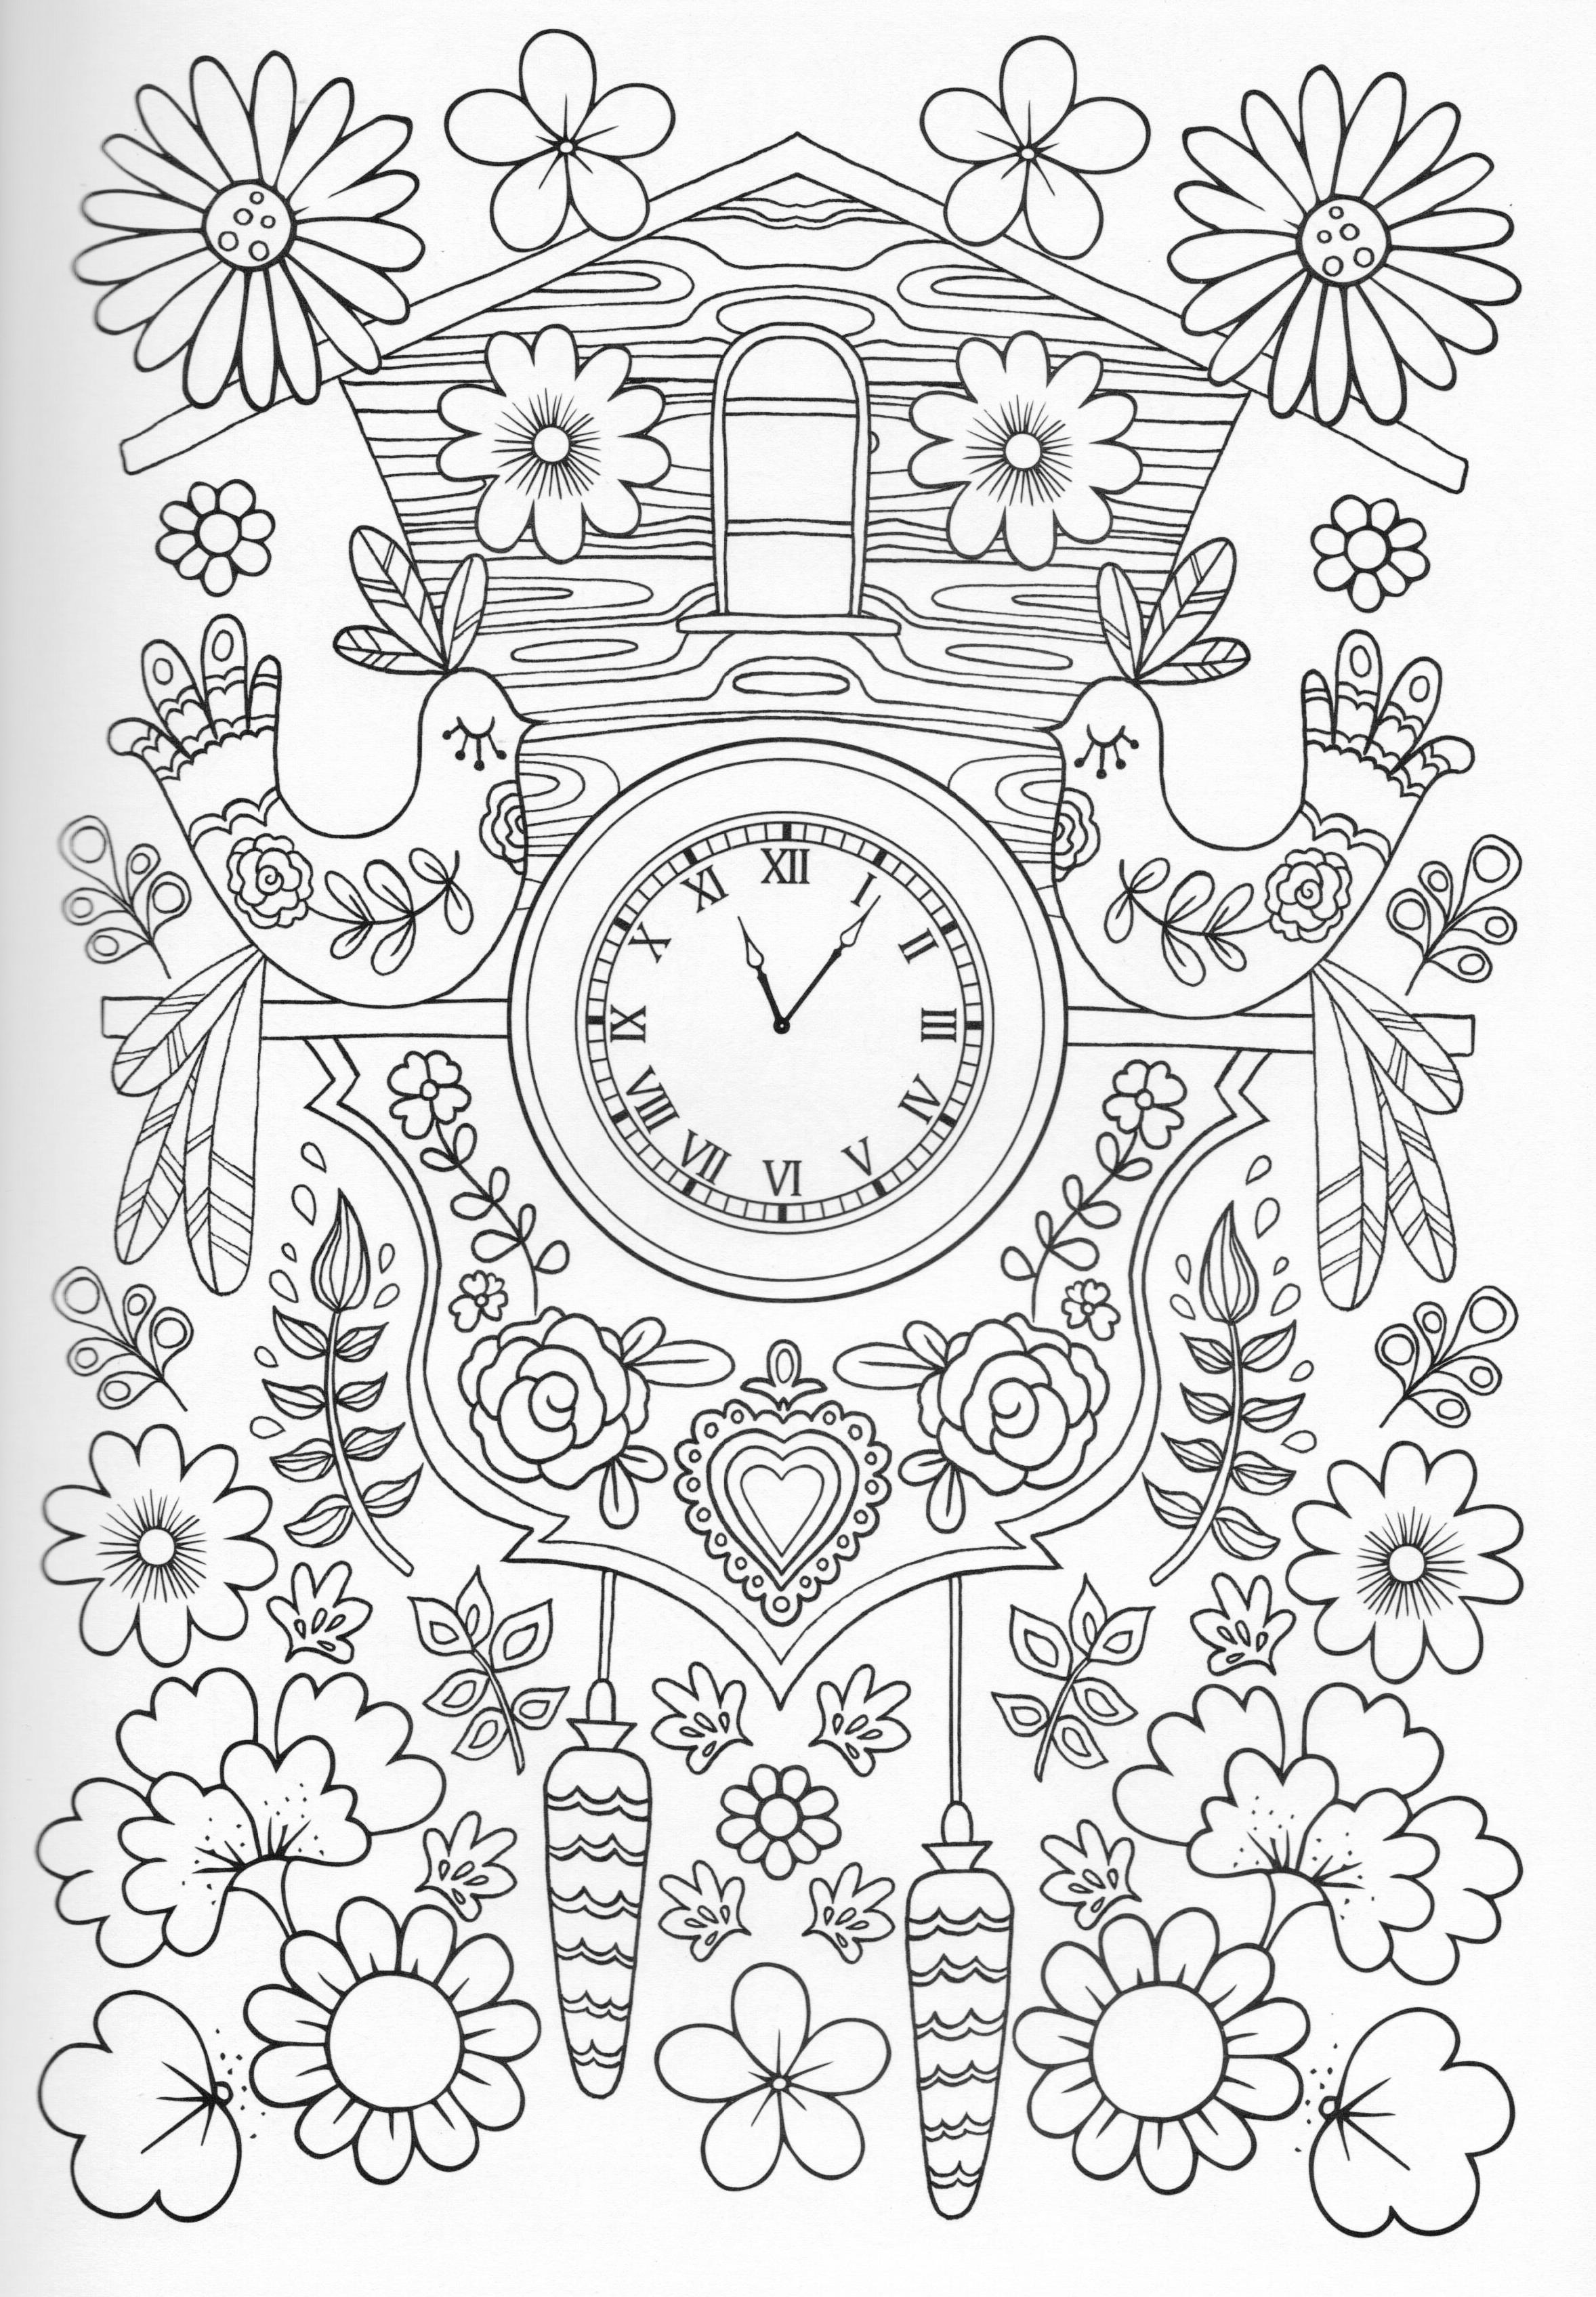 Download Steampunk Wall Clock Coloring Page - Free Coloring Pages Online